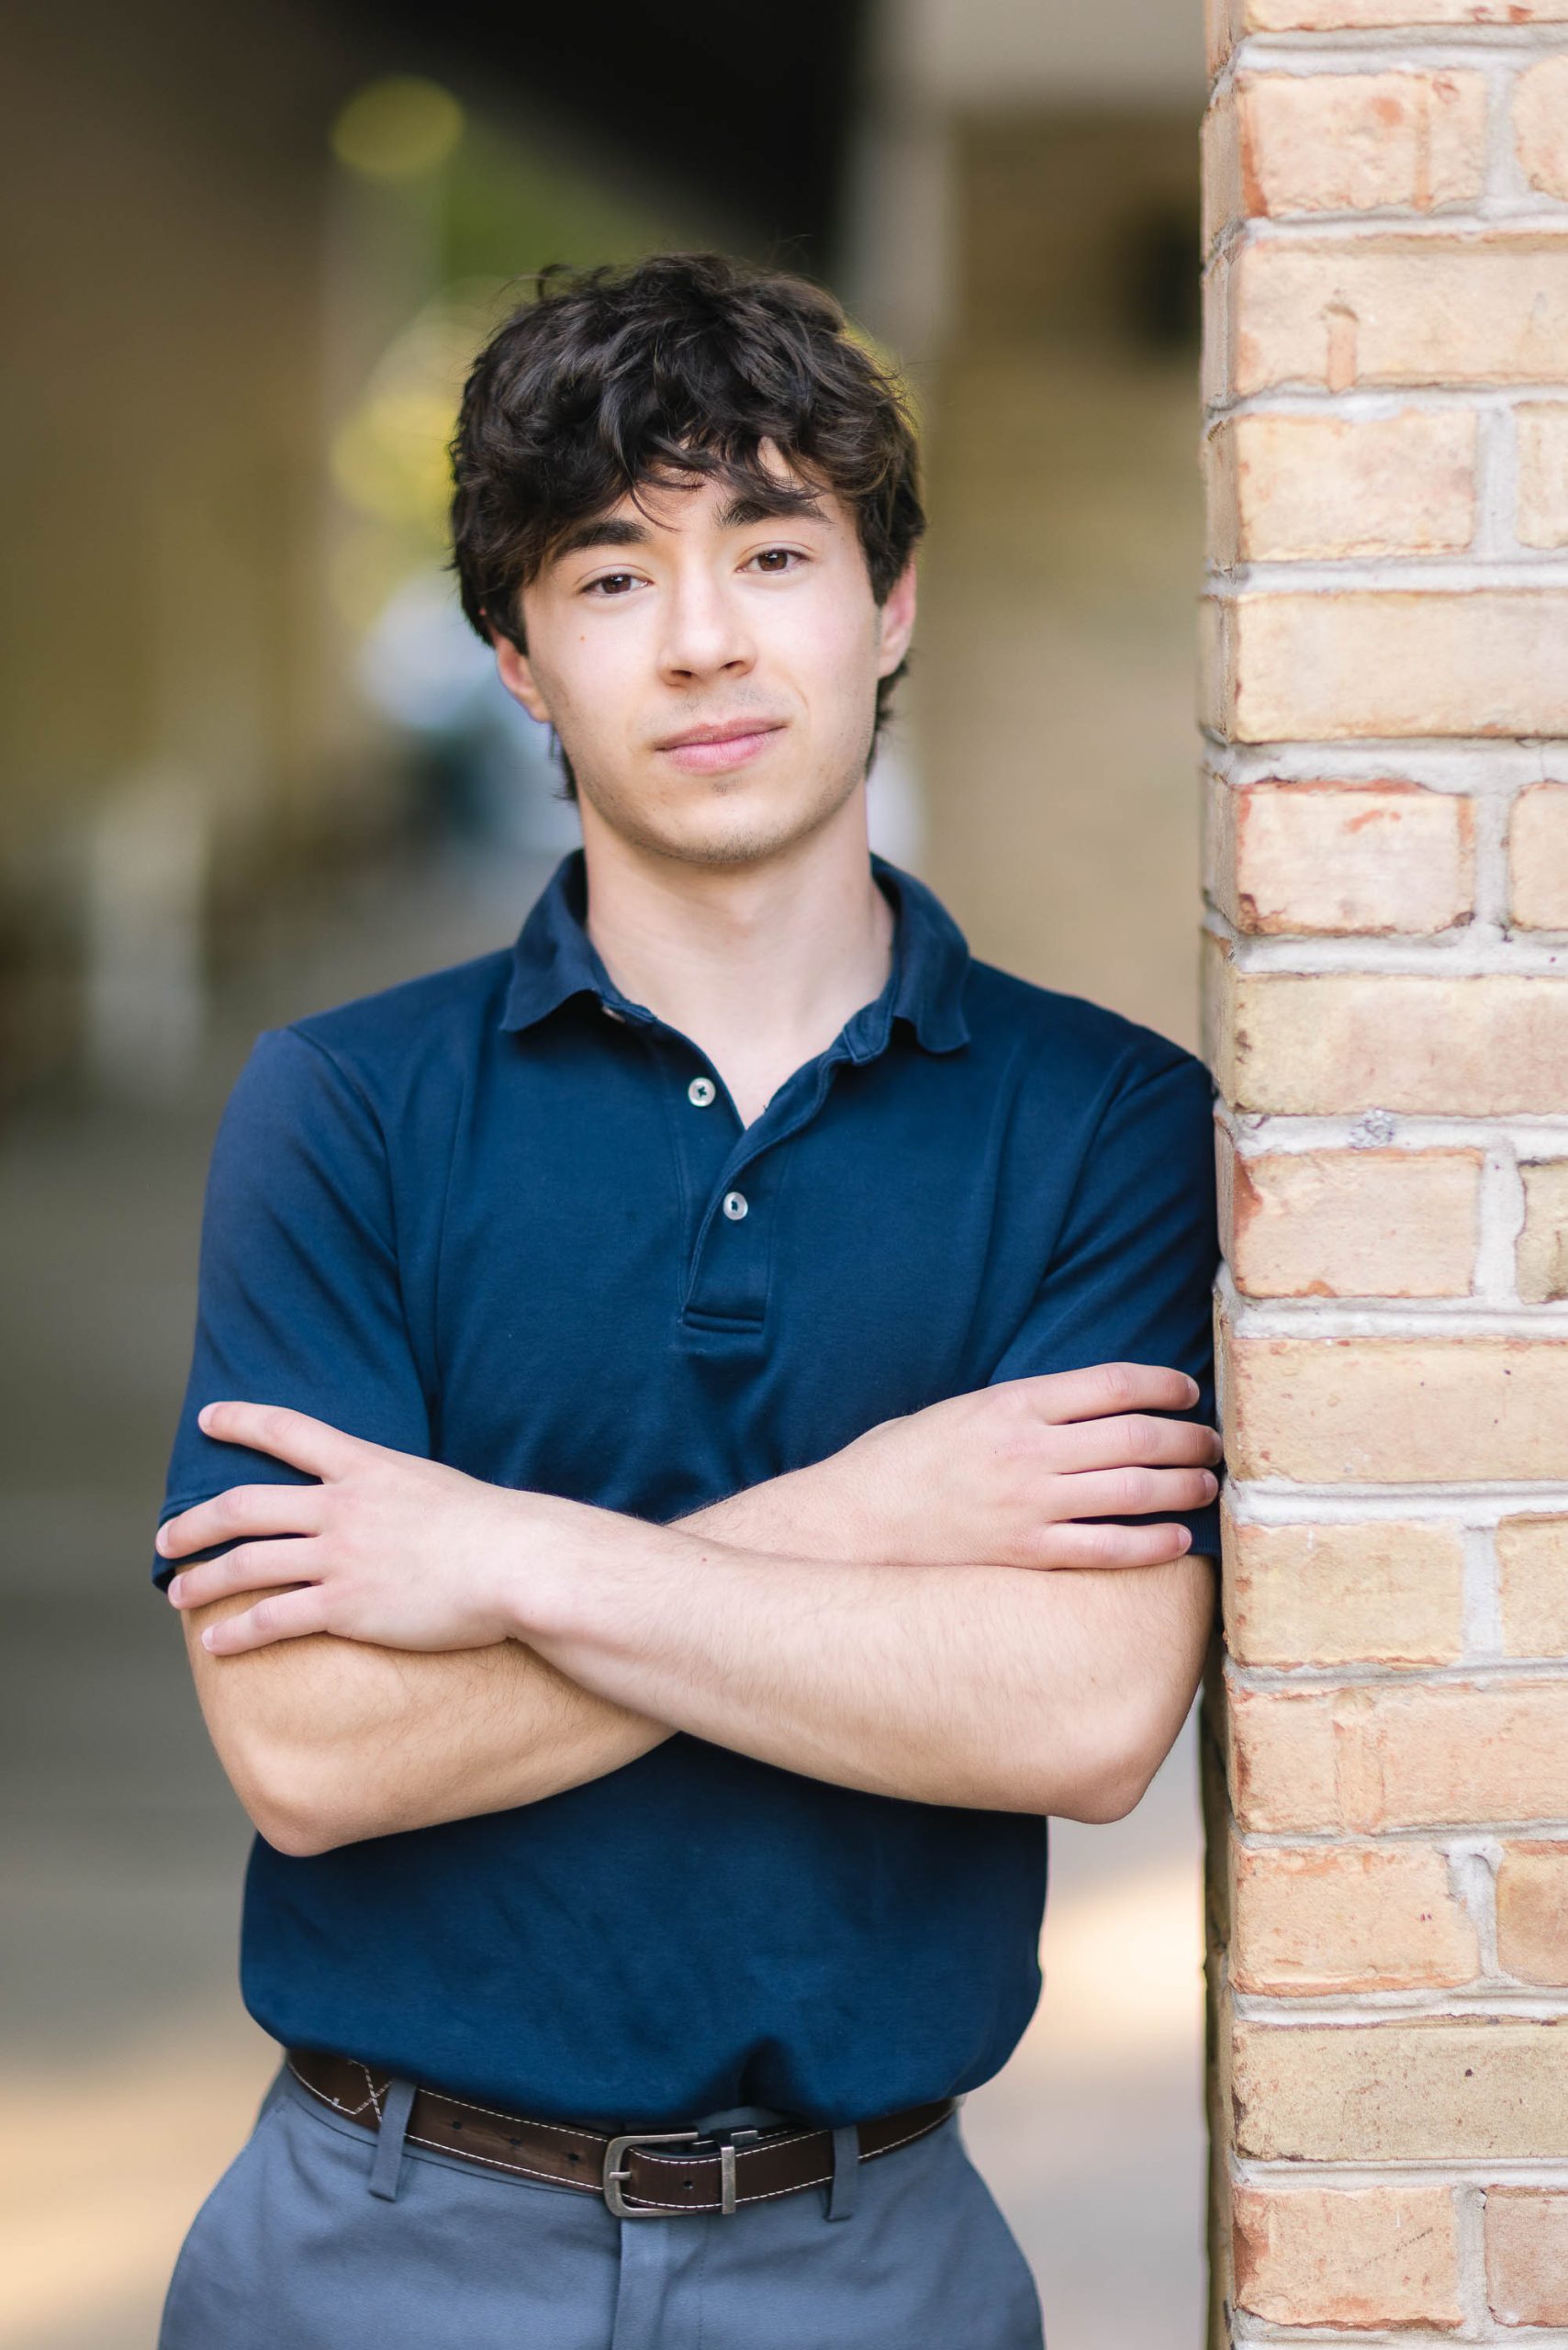 A senior high school student in a blue shirt leaning against a brick wall.